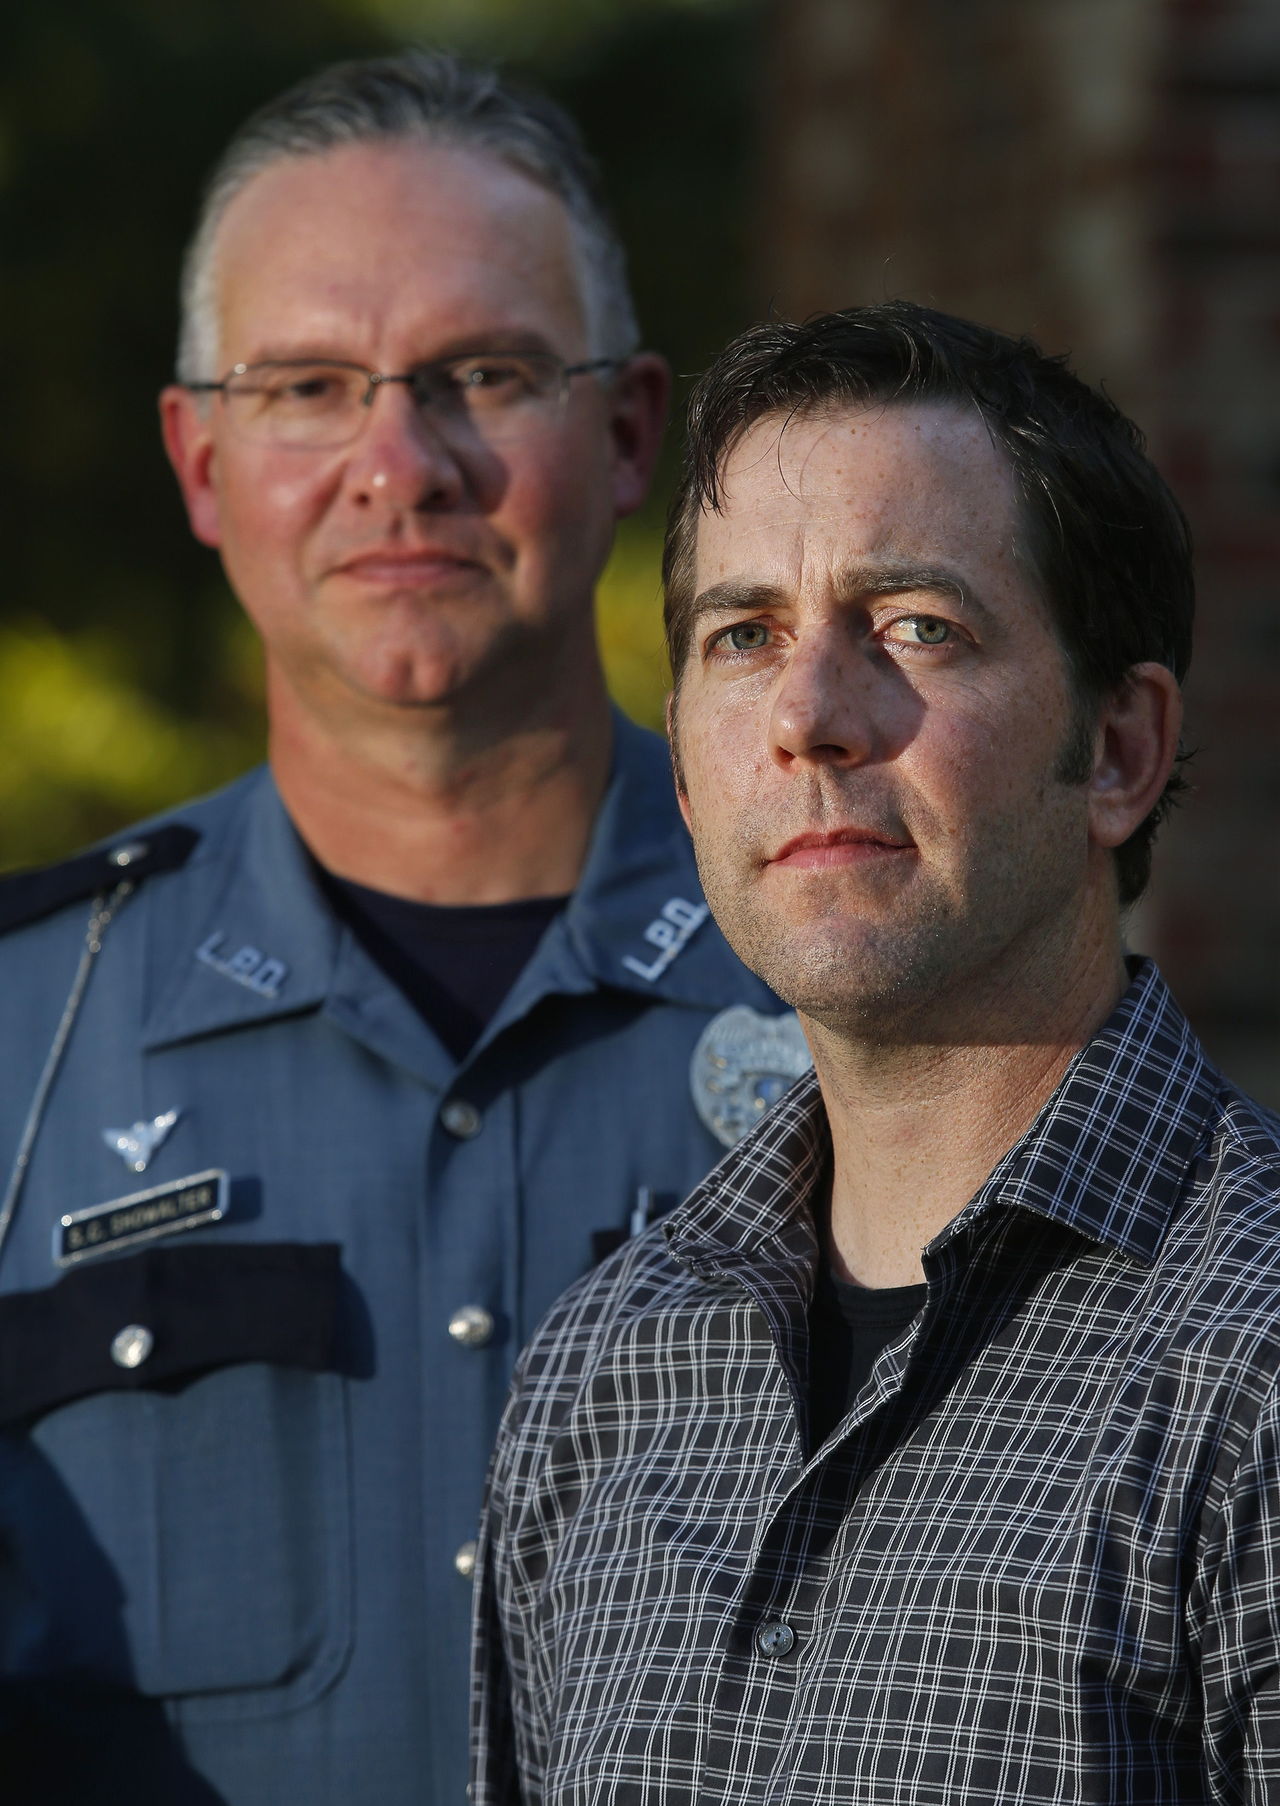 Lynnwood police officer Stephen Showalter (left) met Kevin Warner (right), after Warner was involved in a hit and run crash when a car hit his motorcycle just blocks from his home in Lynnwood.